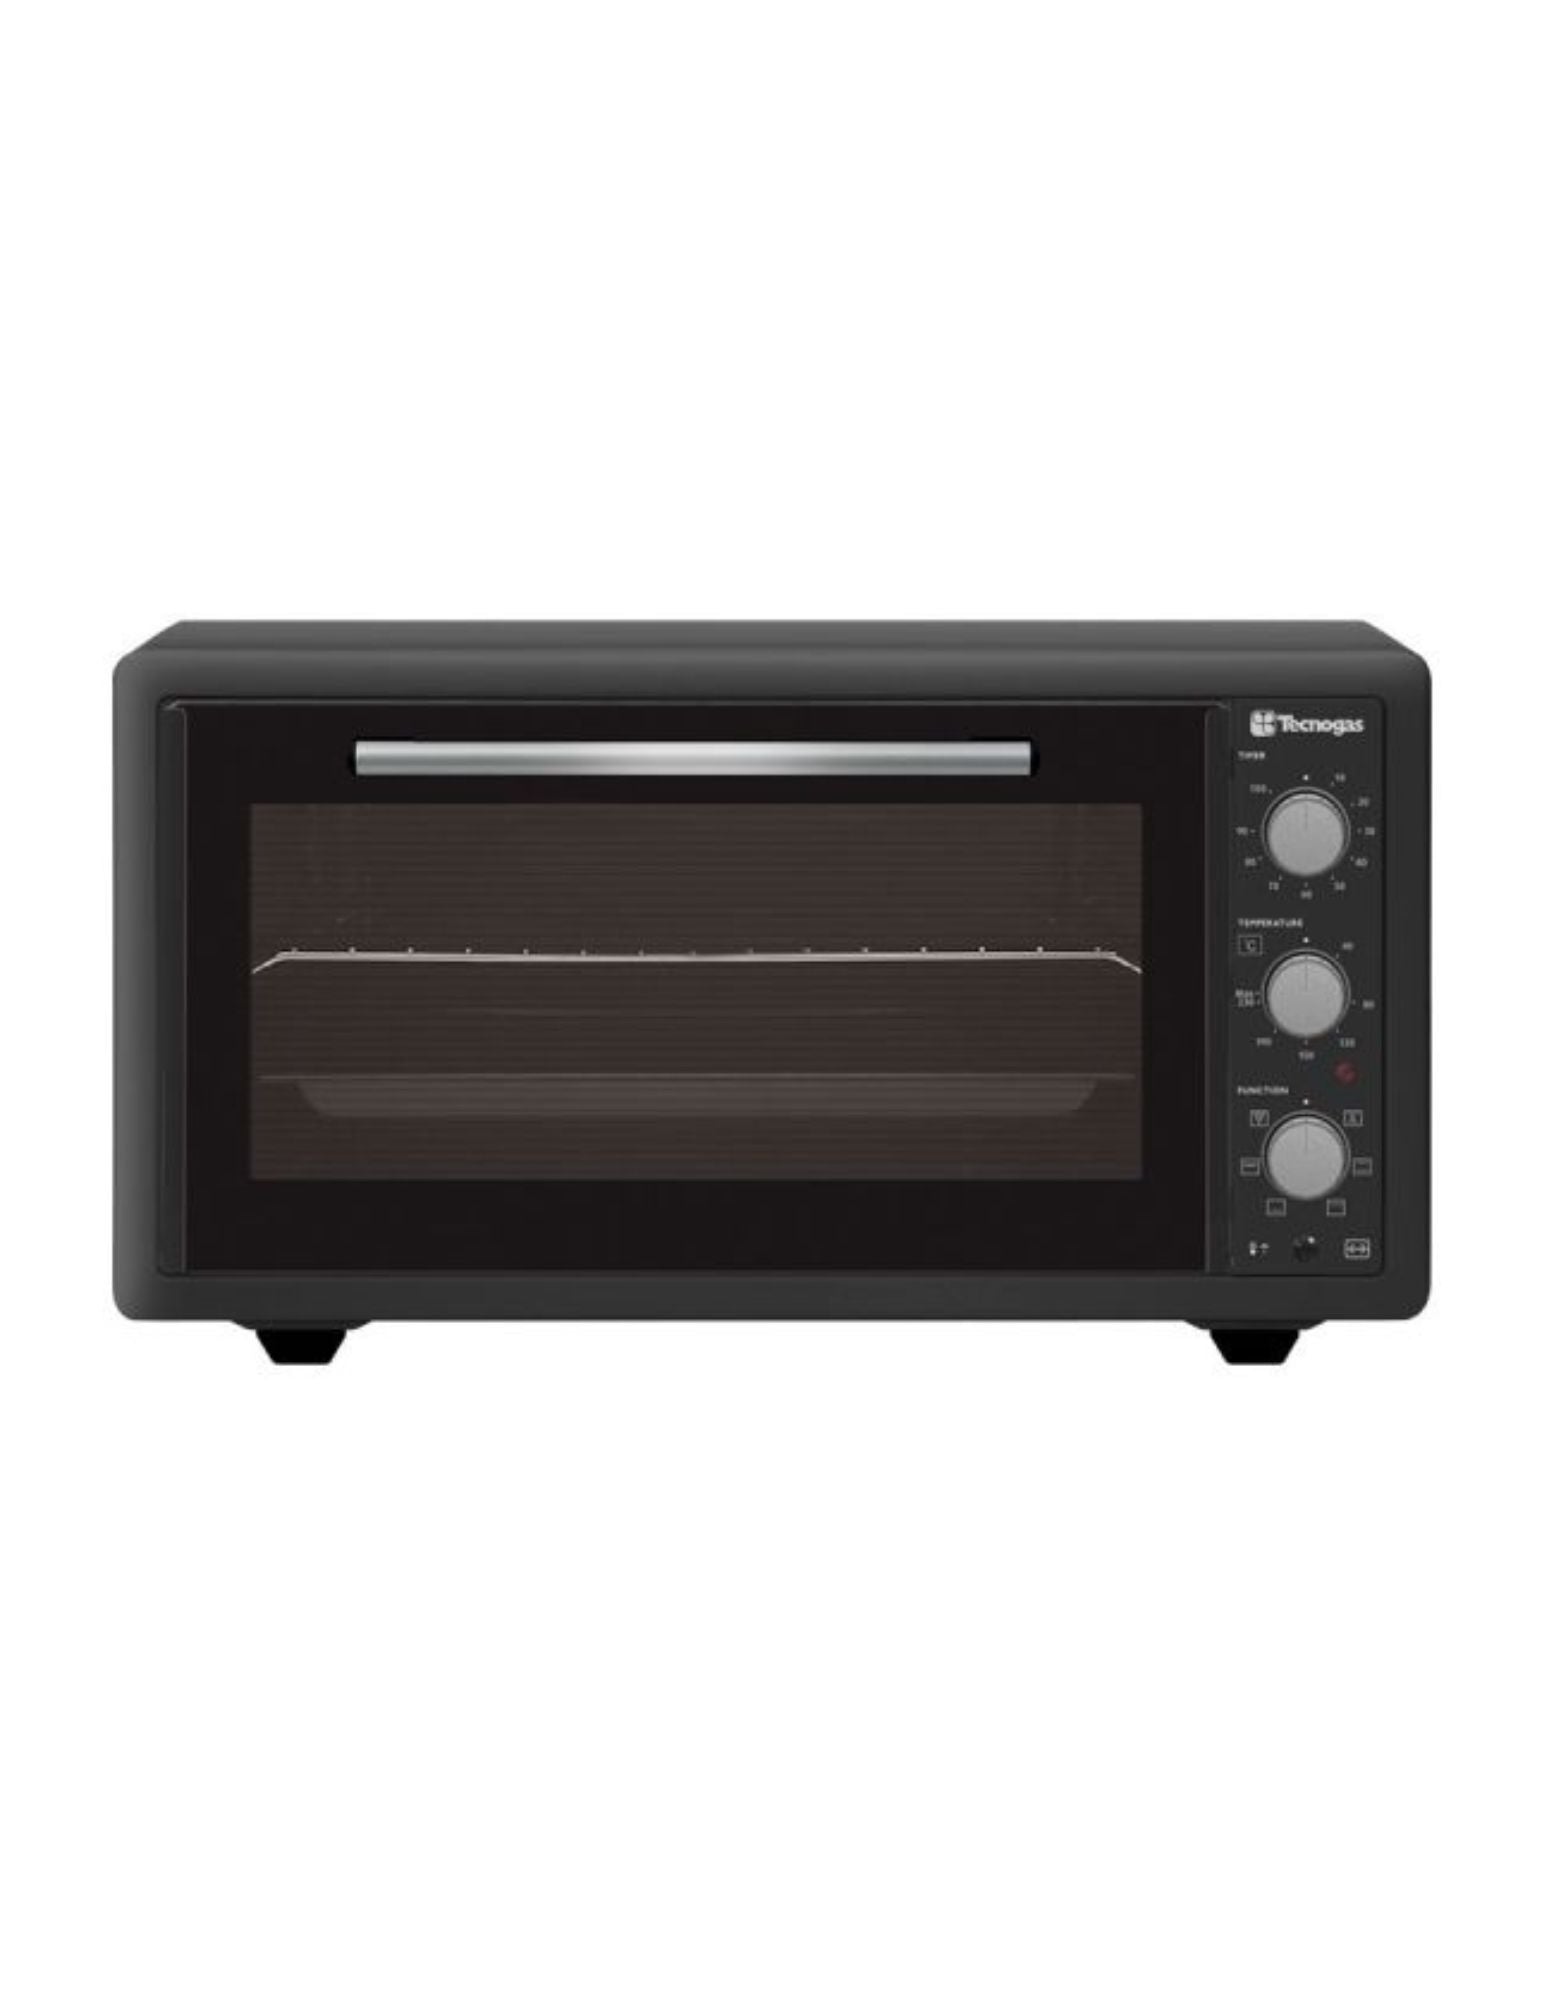 TECNOGAS TEO456MB Table Top Cooking Oven TecnoGas